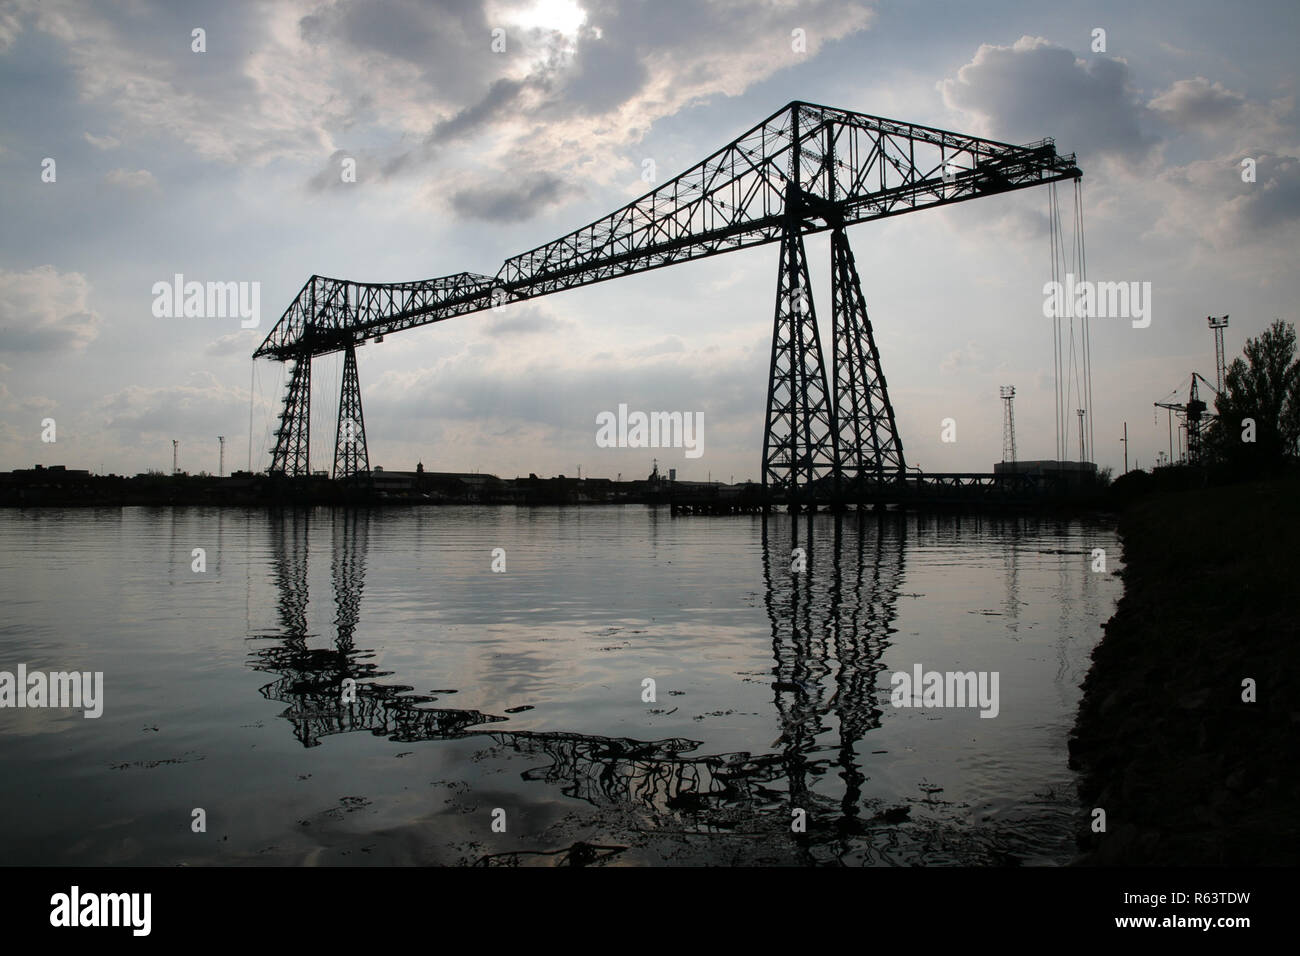 Transporter Bridge spaning The River Tees in Middlesbrough North East England. The Tees Transporter Bridge built in 1910 carries vehicles & pedestrians by a moving suspended platform or gondala. Stock Photo